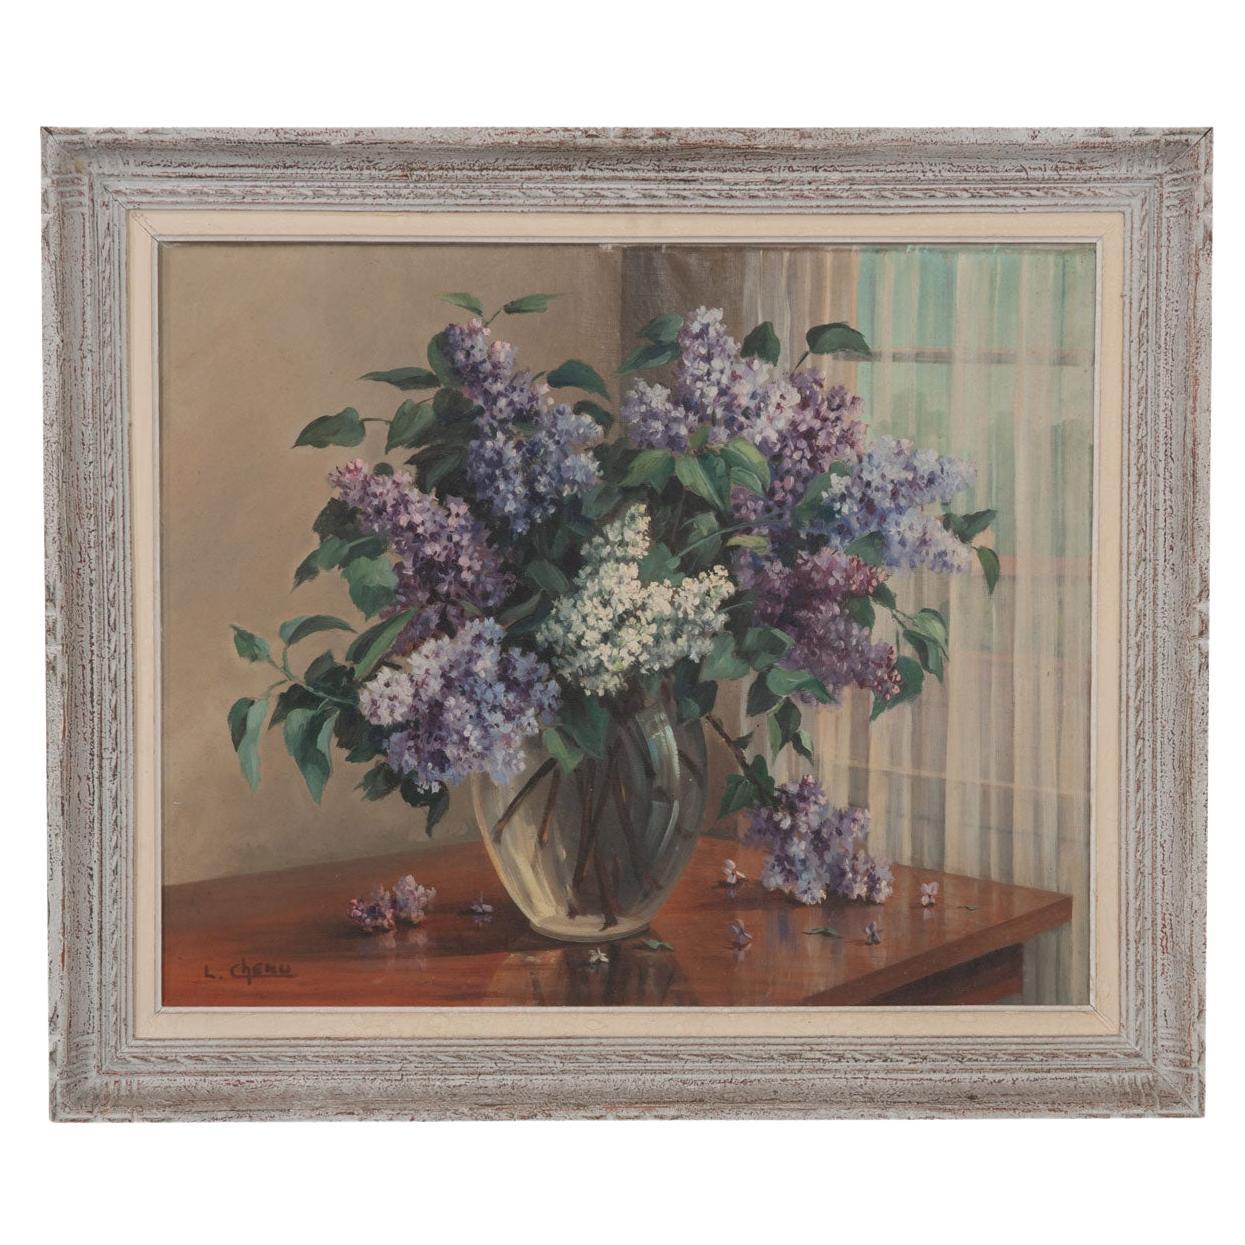 Lilacs by Lucien Chenu